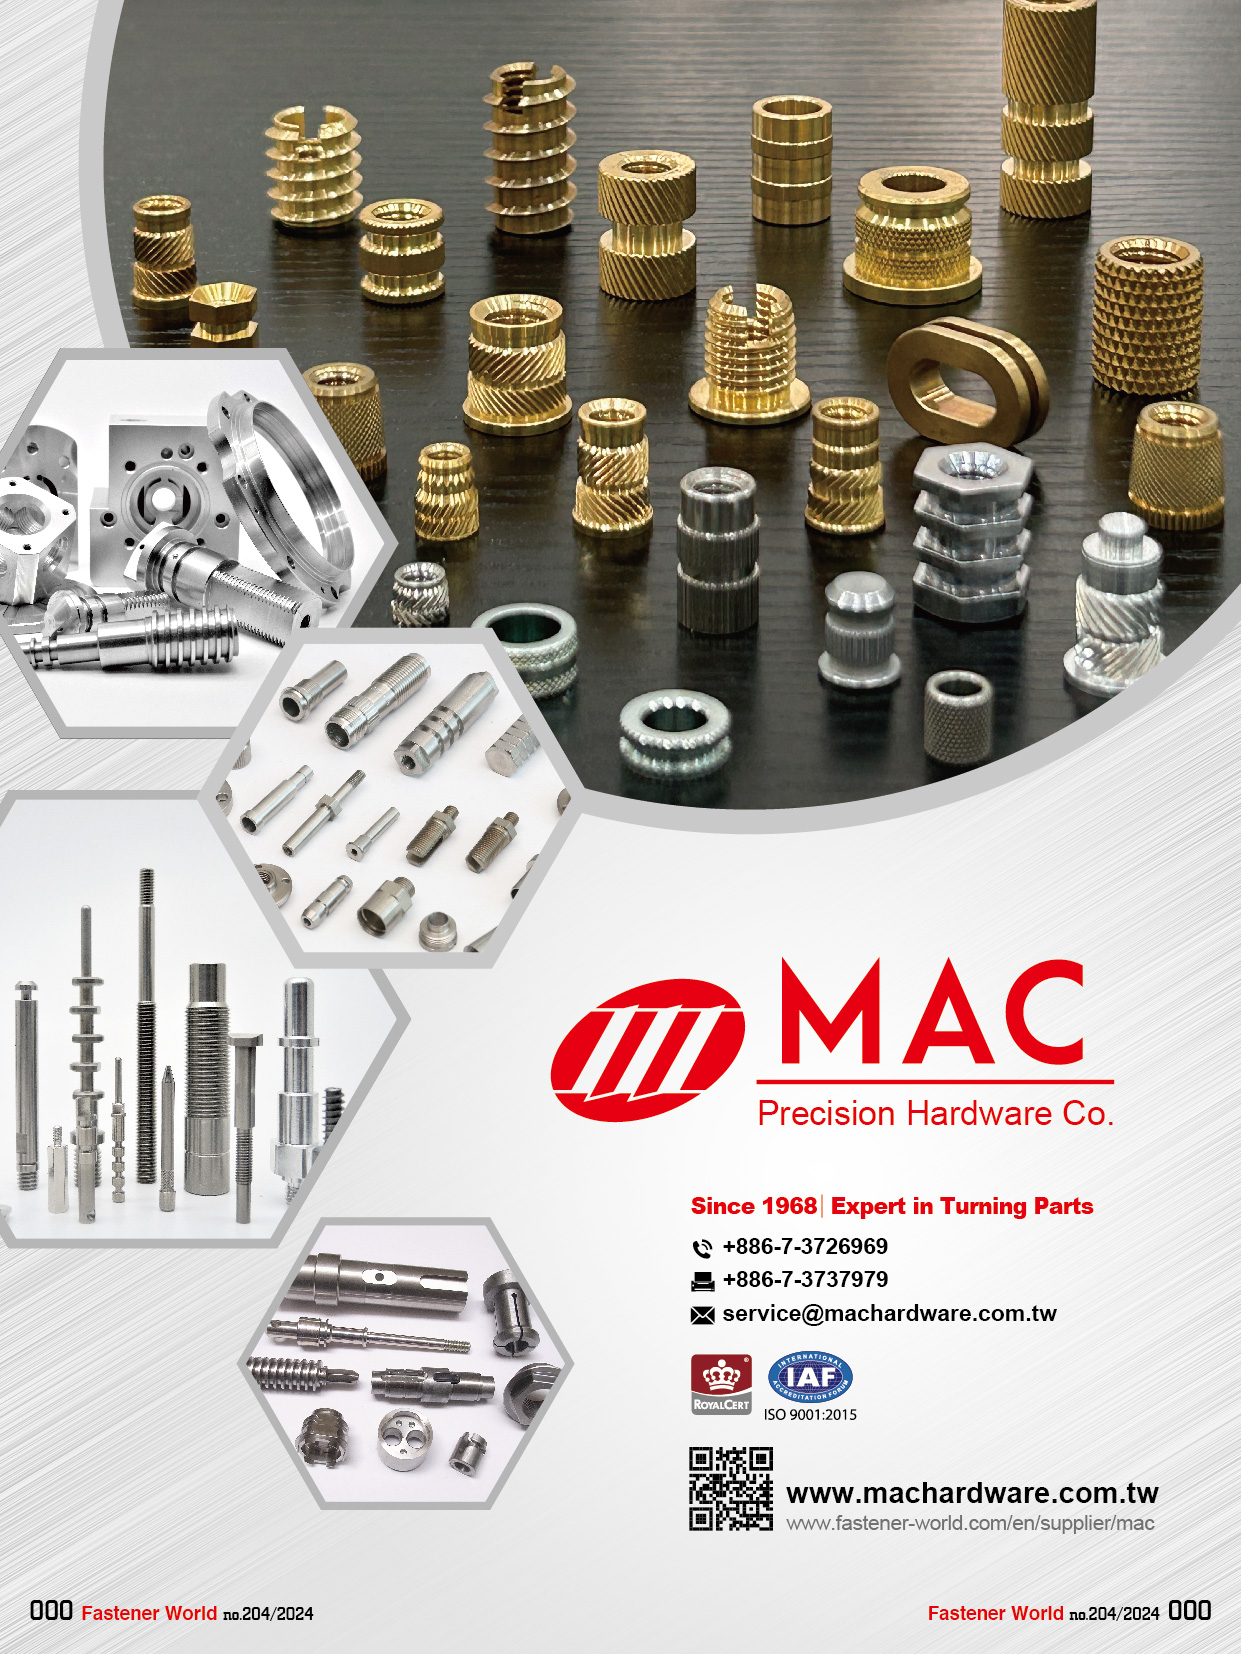 MAC PRECISION HARDWARE CO. , Precision Turning Parts, Locking Beads, Assembly Parts, Cold/Hot Forging Parts,Extrusion Parts,Bolt-nut,Precision Shaft Parts,Hydraulic Fitting,Die Casting Parts,Pipe Joint,Stamping Parts,Lock Accessories, Plastic Injection Parts, Valve rod/Valve element